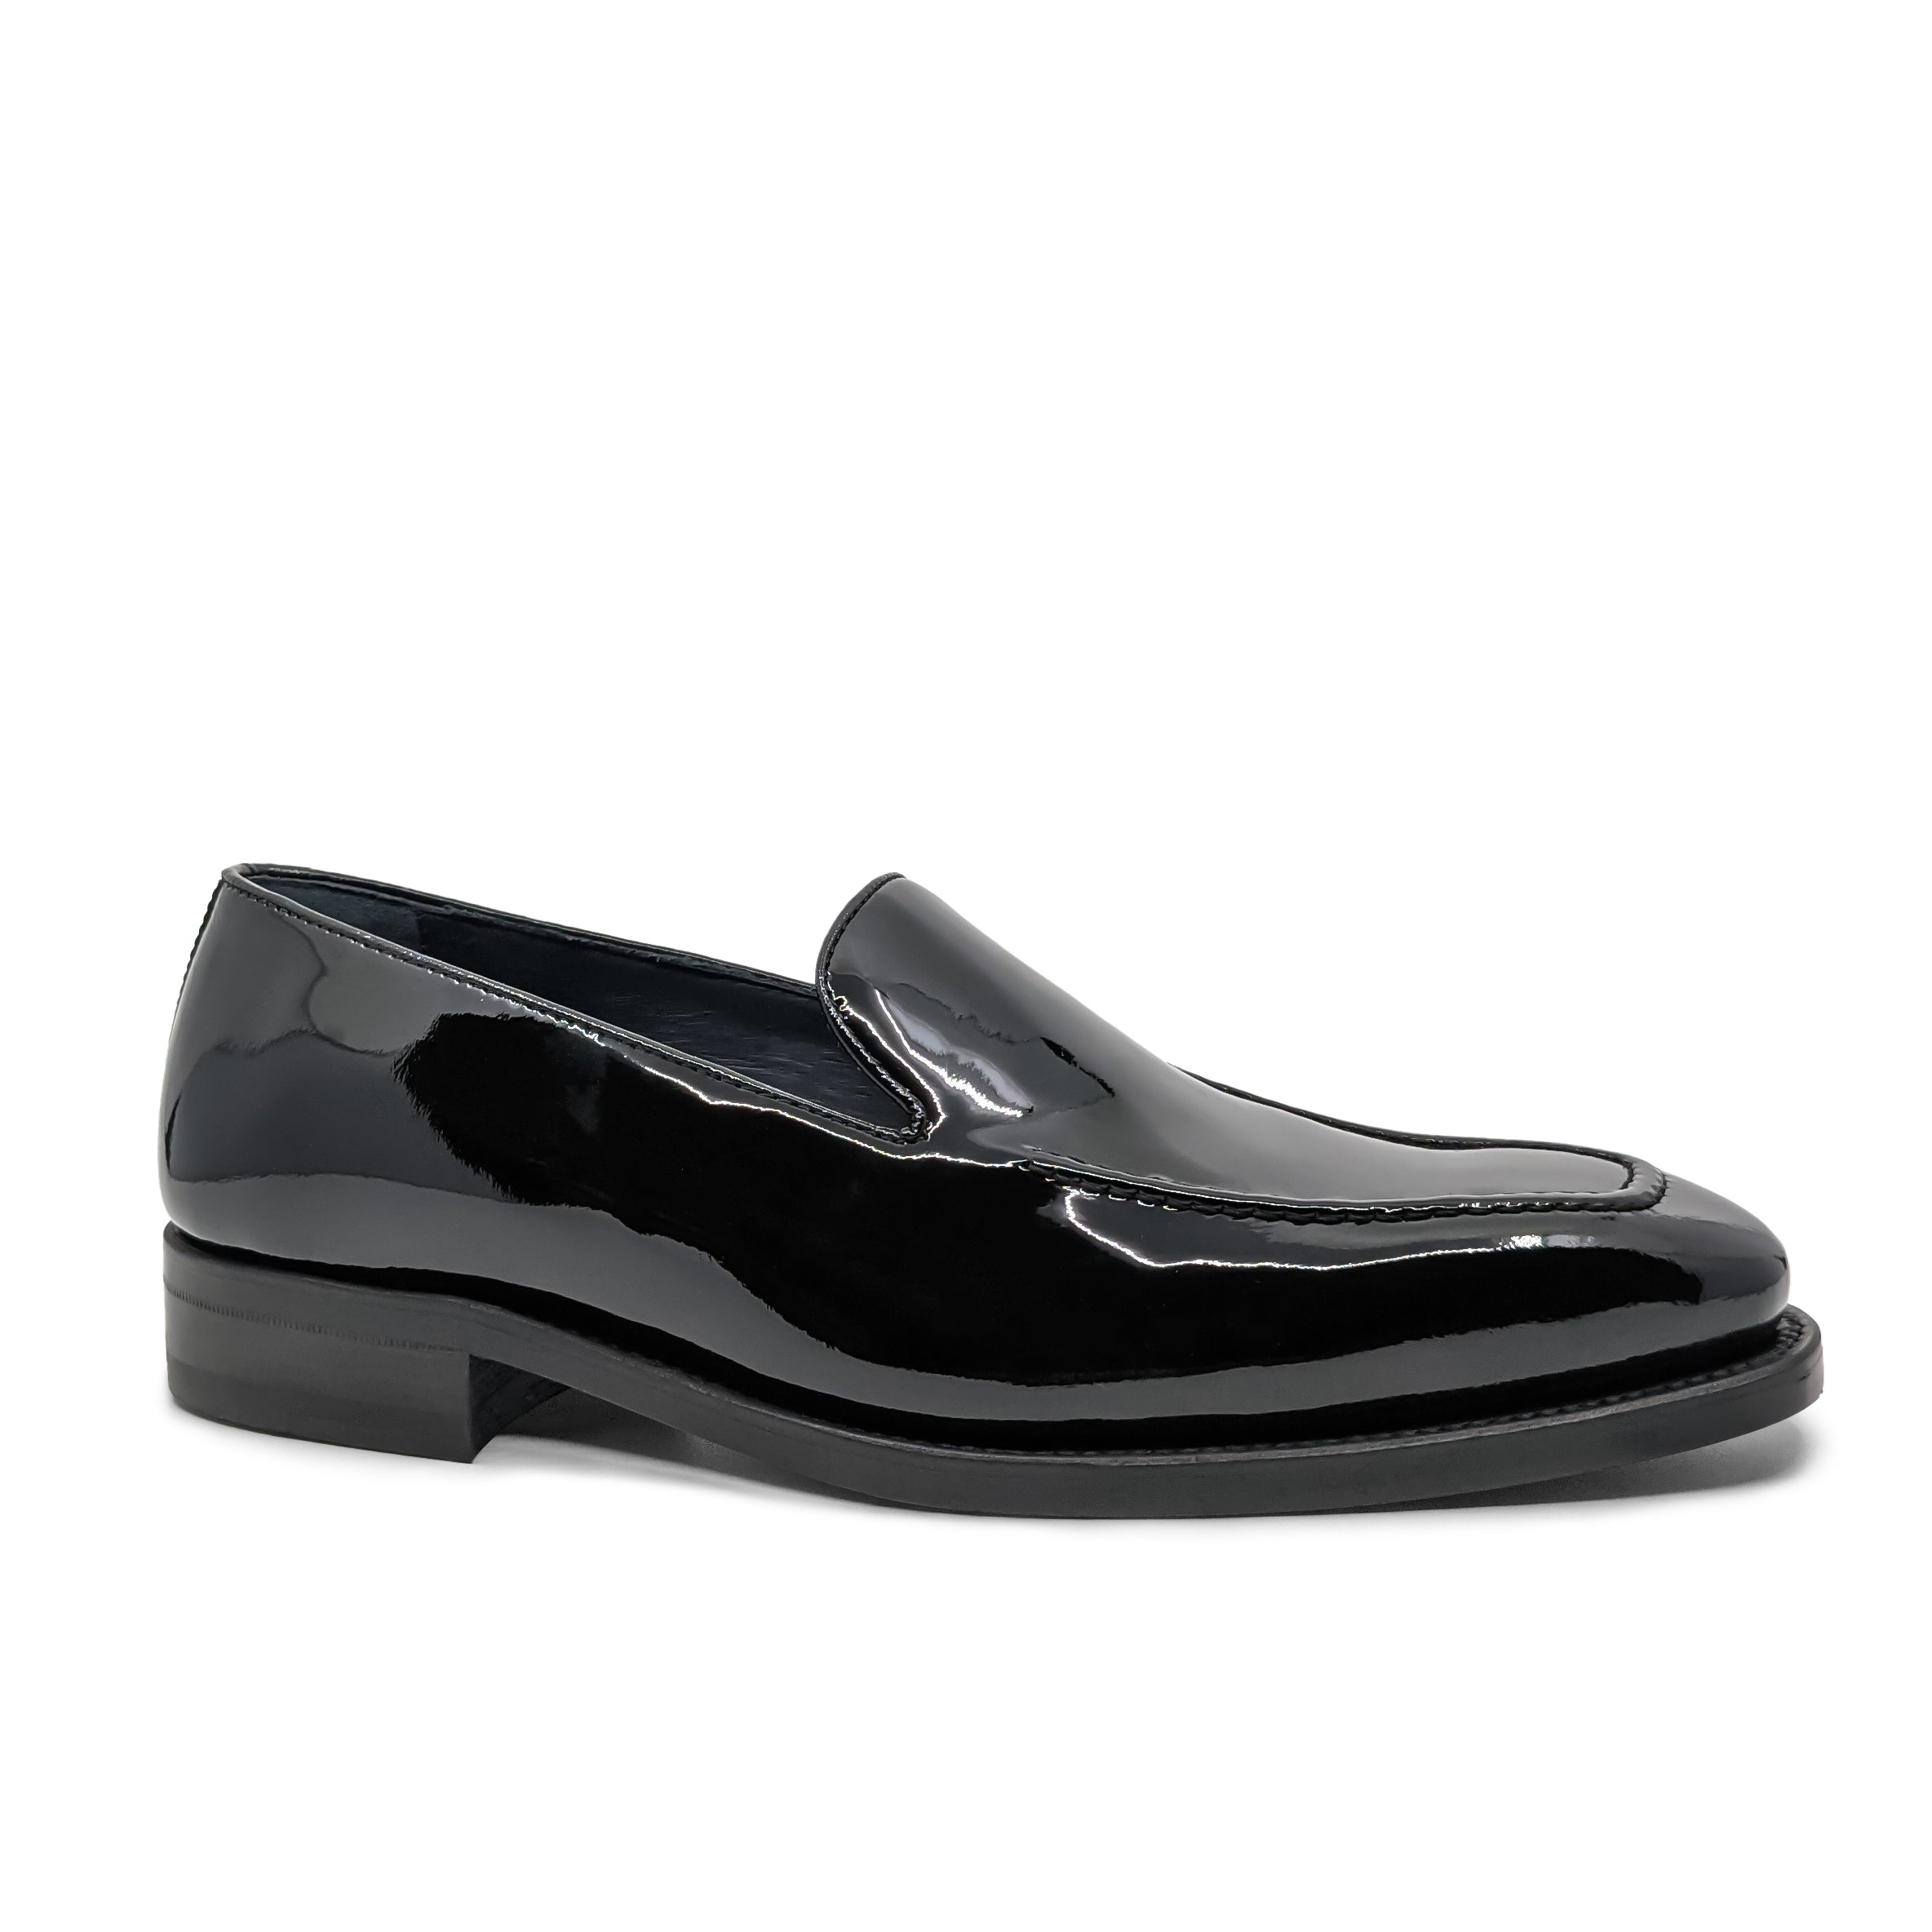 Crossover Footwear's Exclusive Loafer Collection | Premium Quality ...